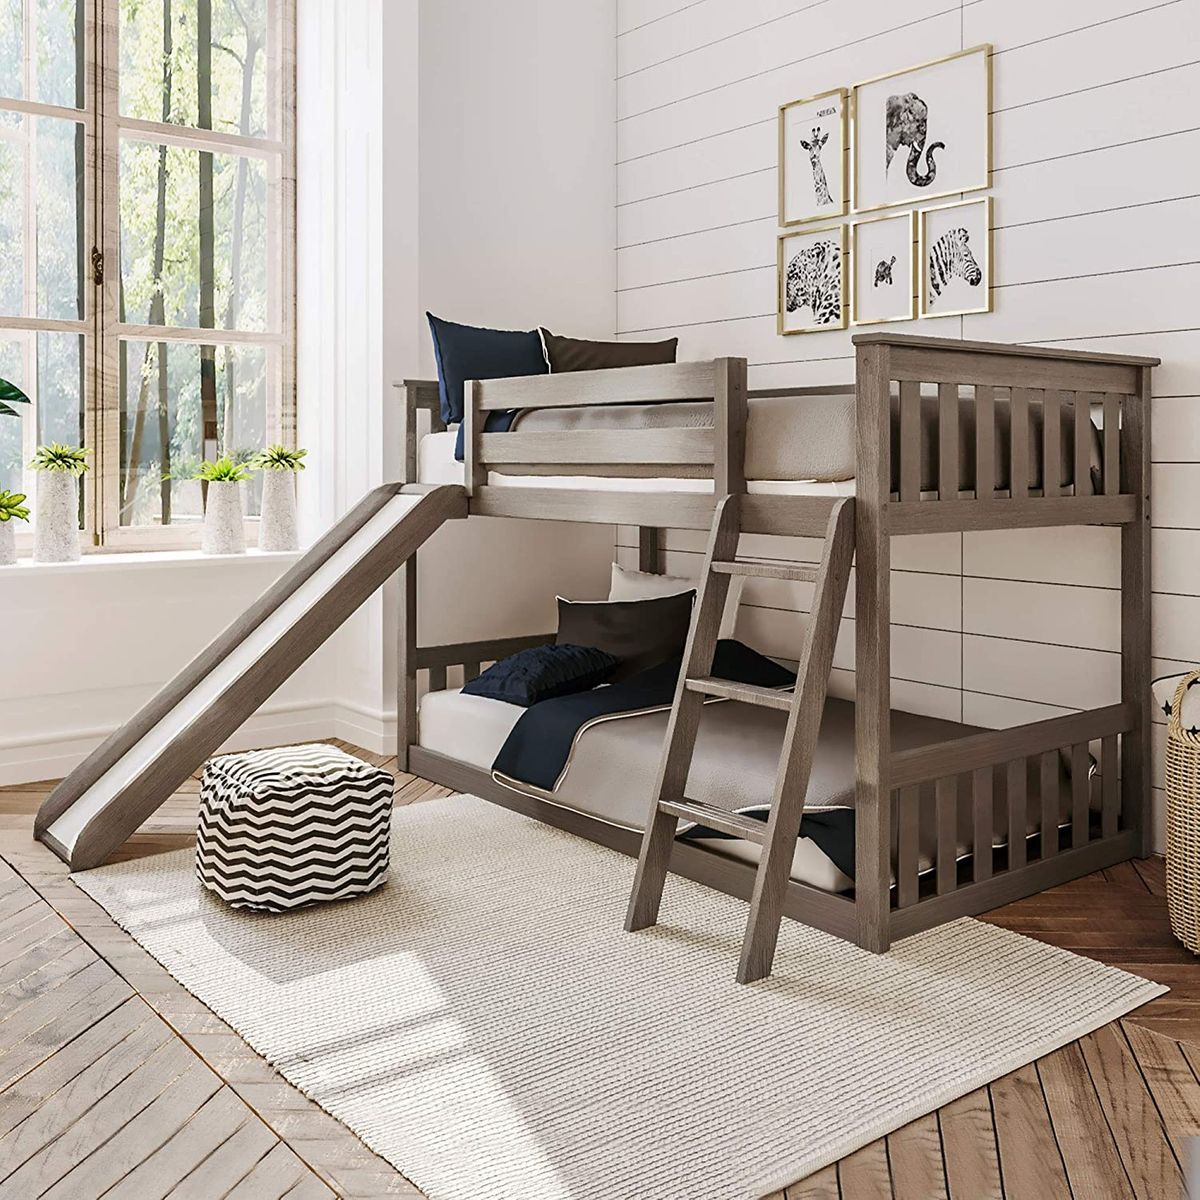 8 Best Bunk Beds 2020 The Strategist, Extra Long Twin Bunk Bed Frame